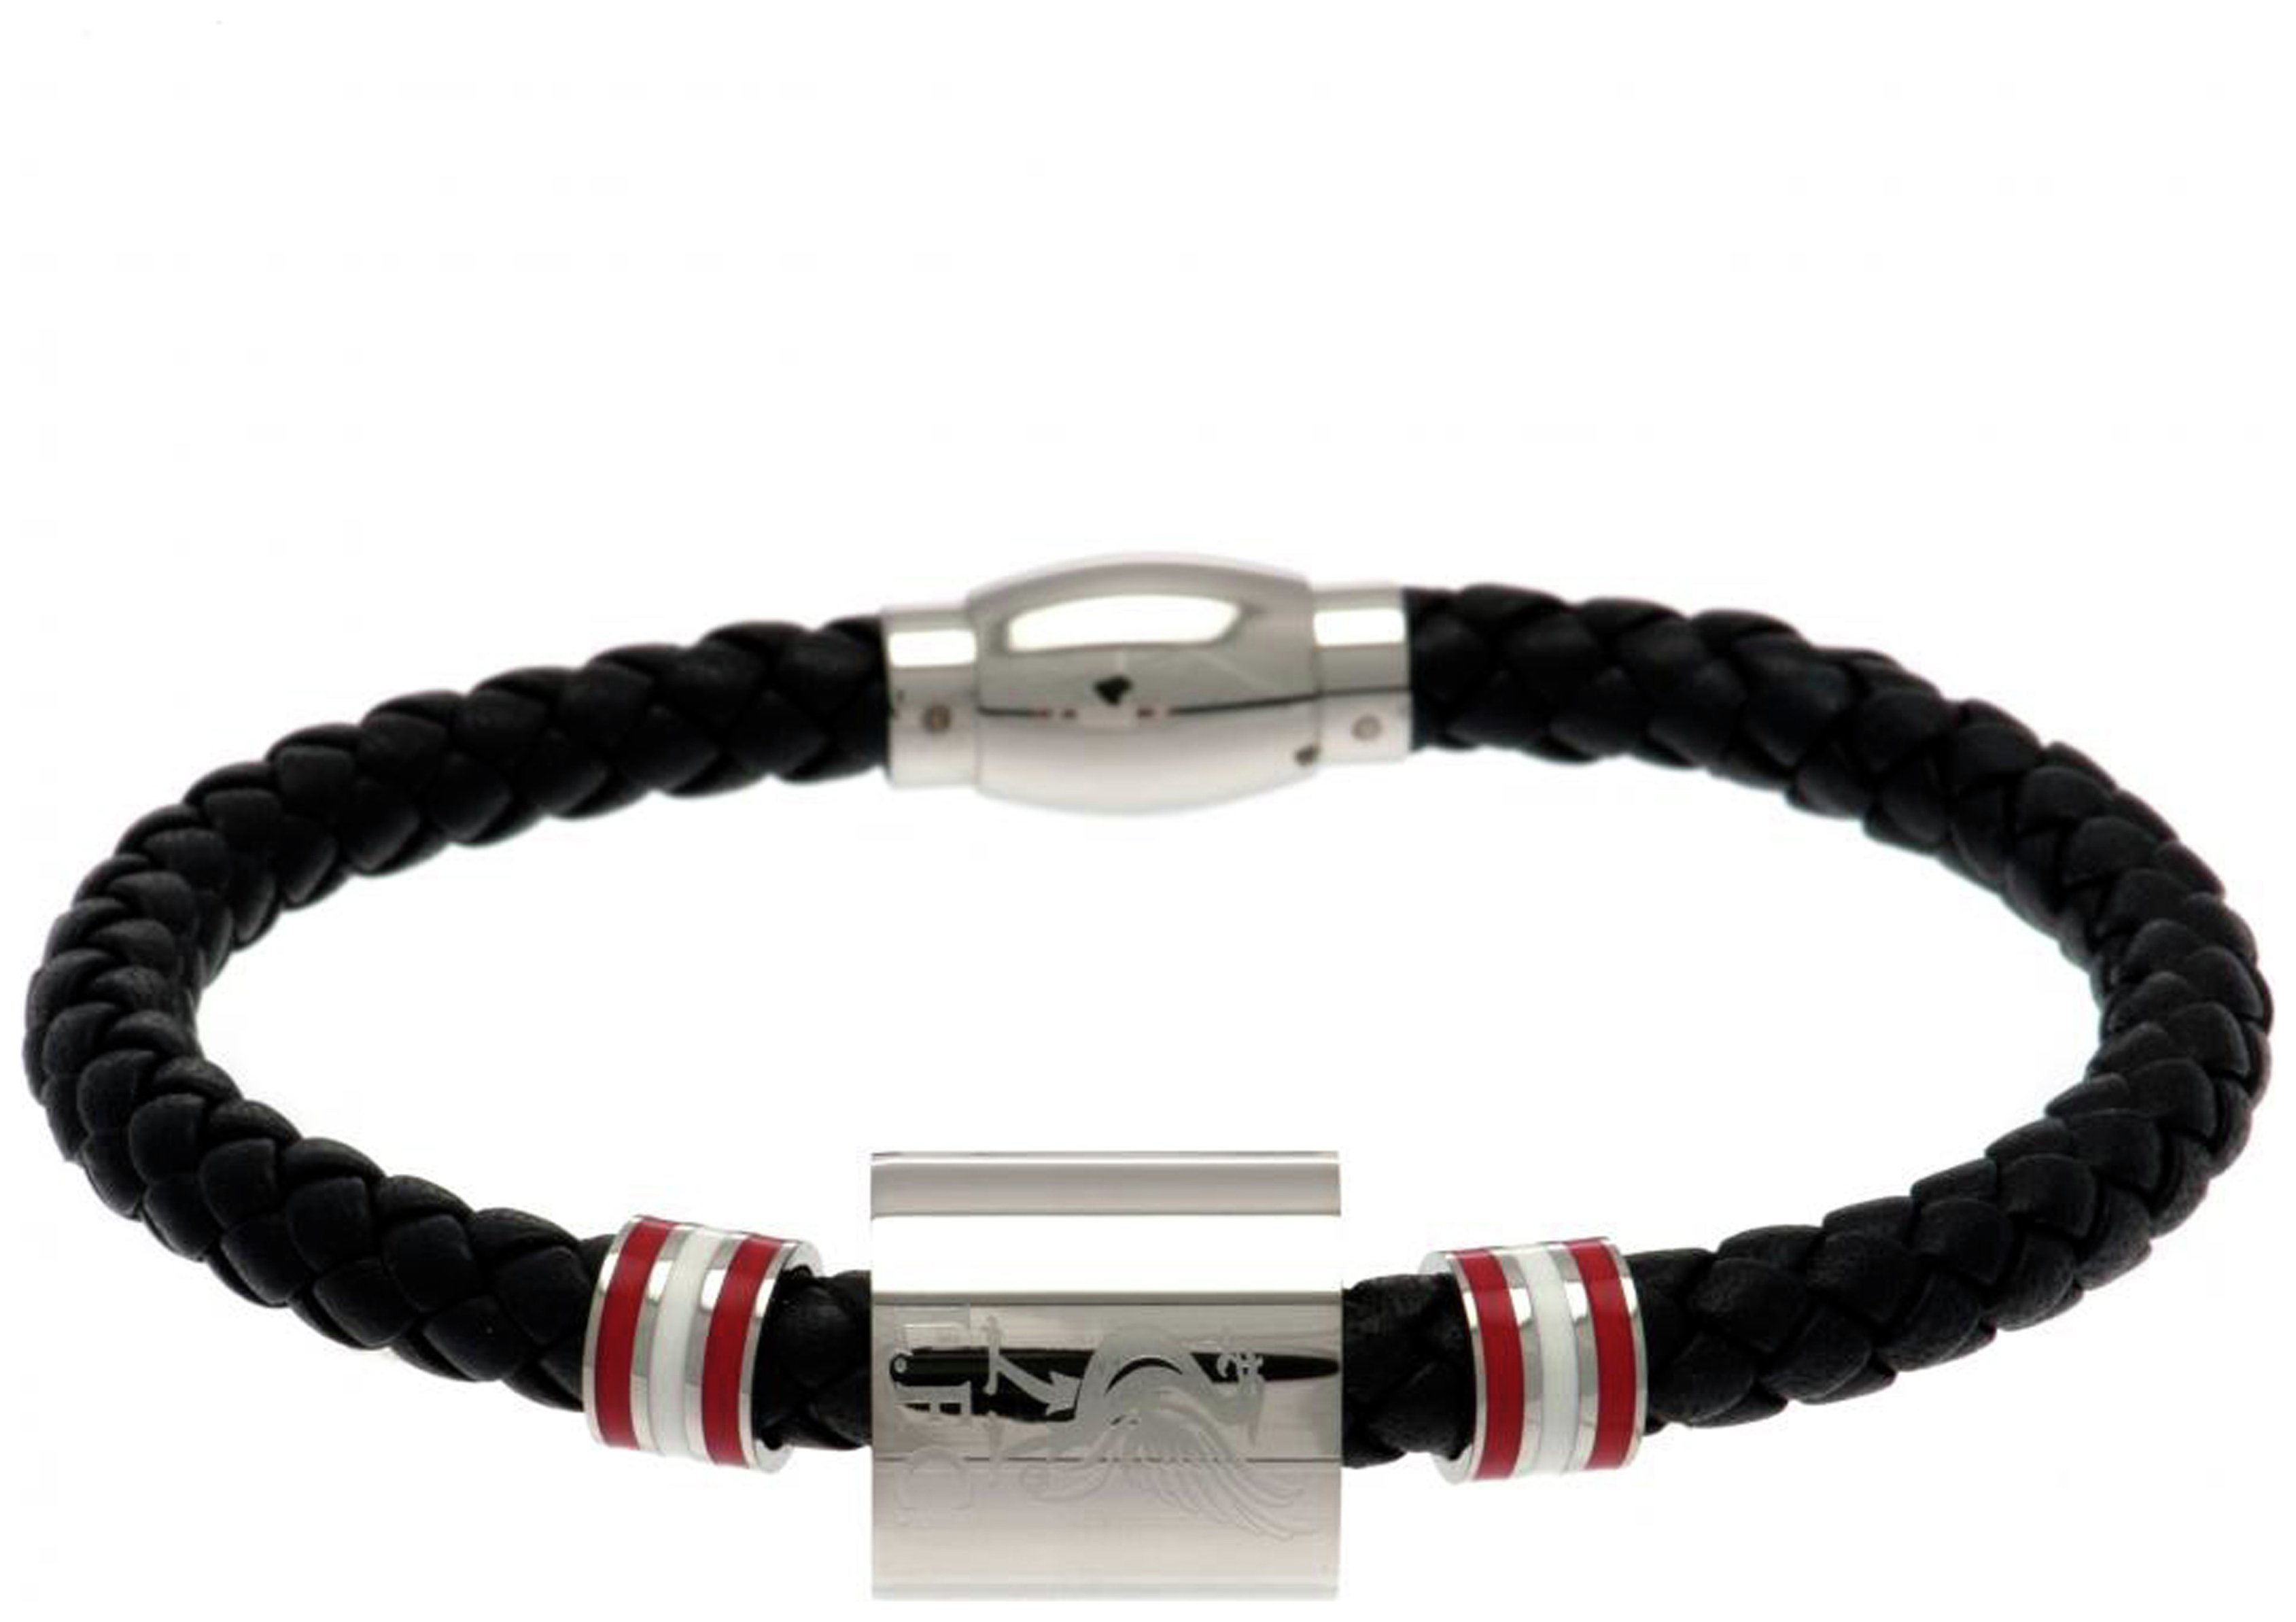 Stainless Steel and Leather Liverpool Bracelet.